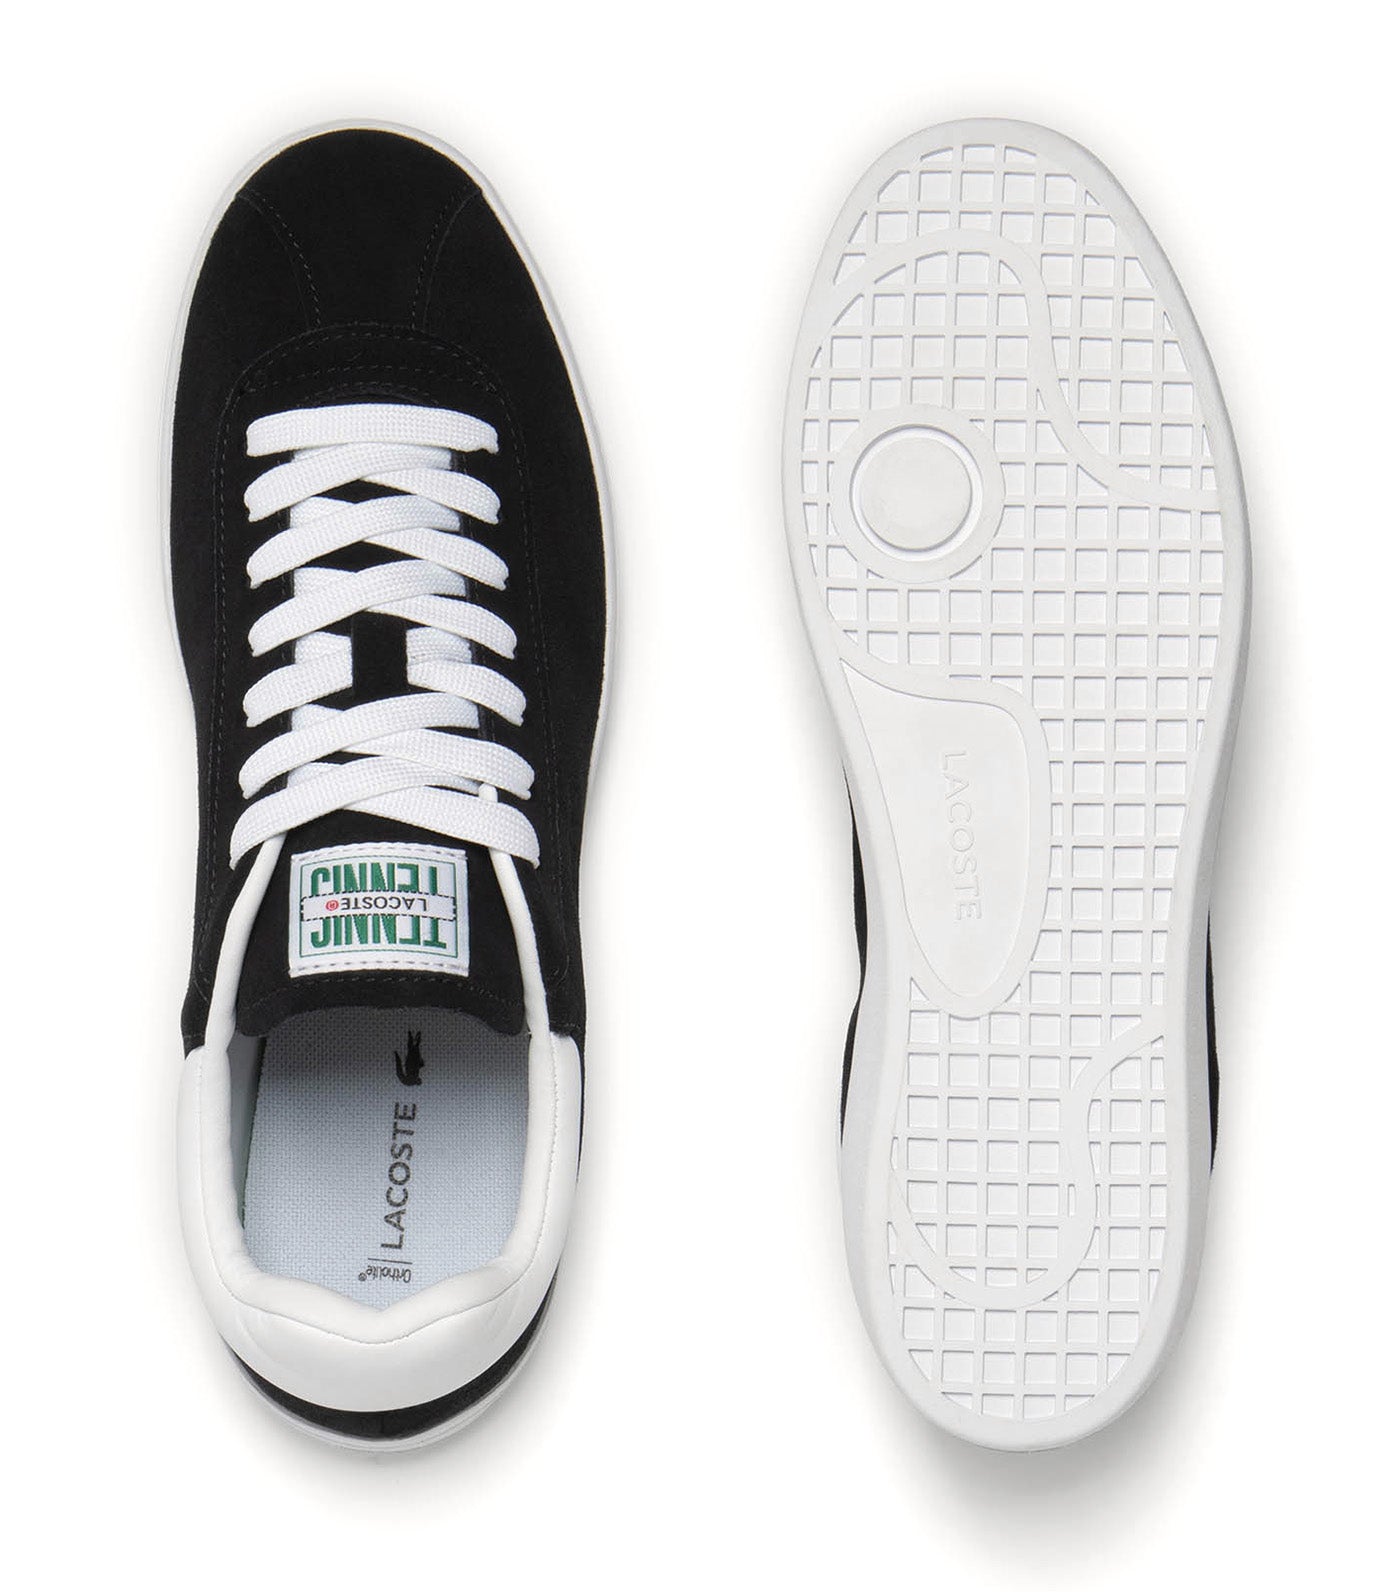 Men's Baseshot Suede Trainers Black/White